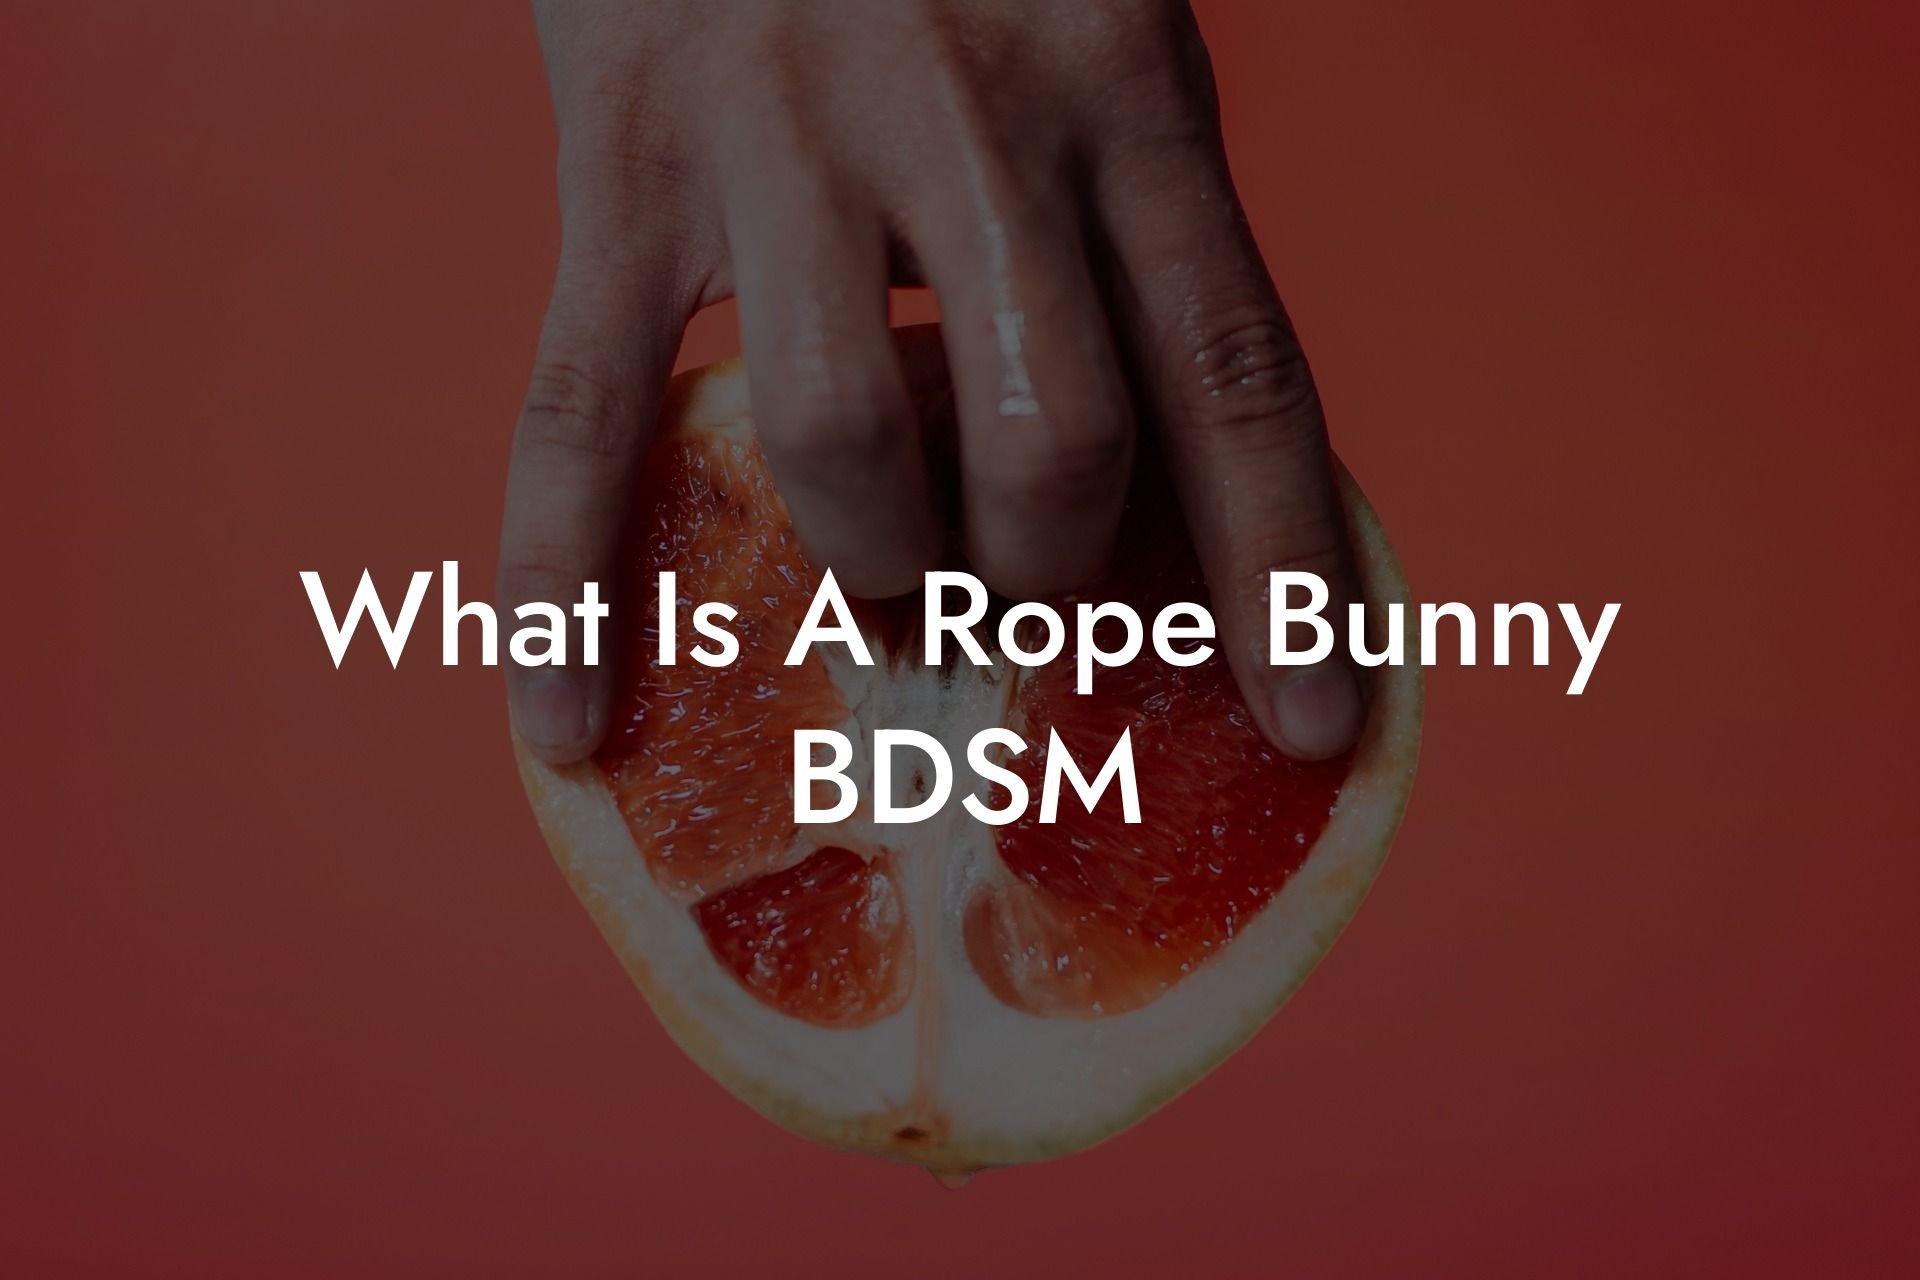 What Is A Rope Bunny BDSM